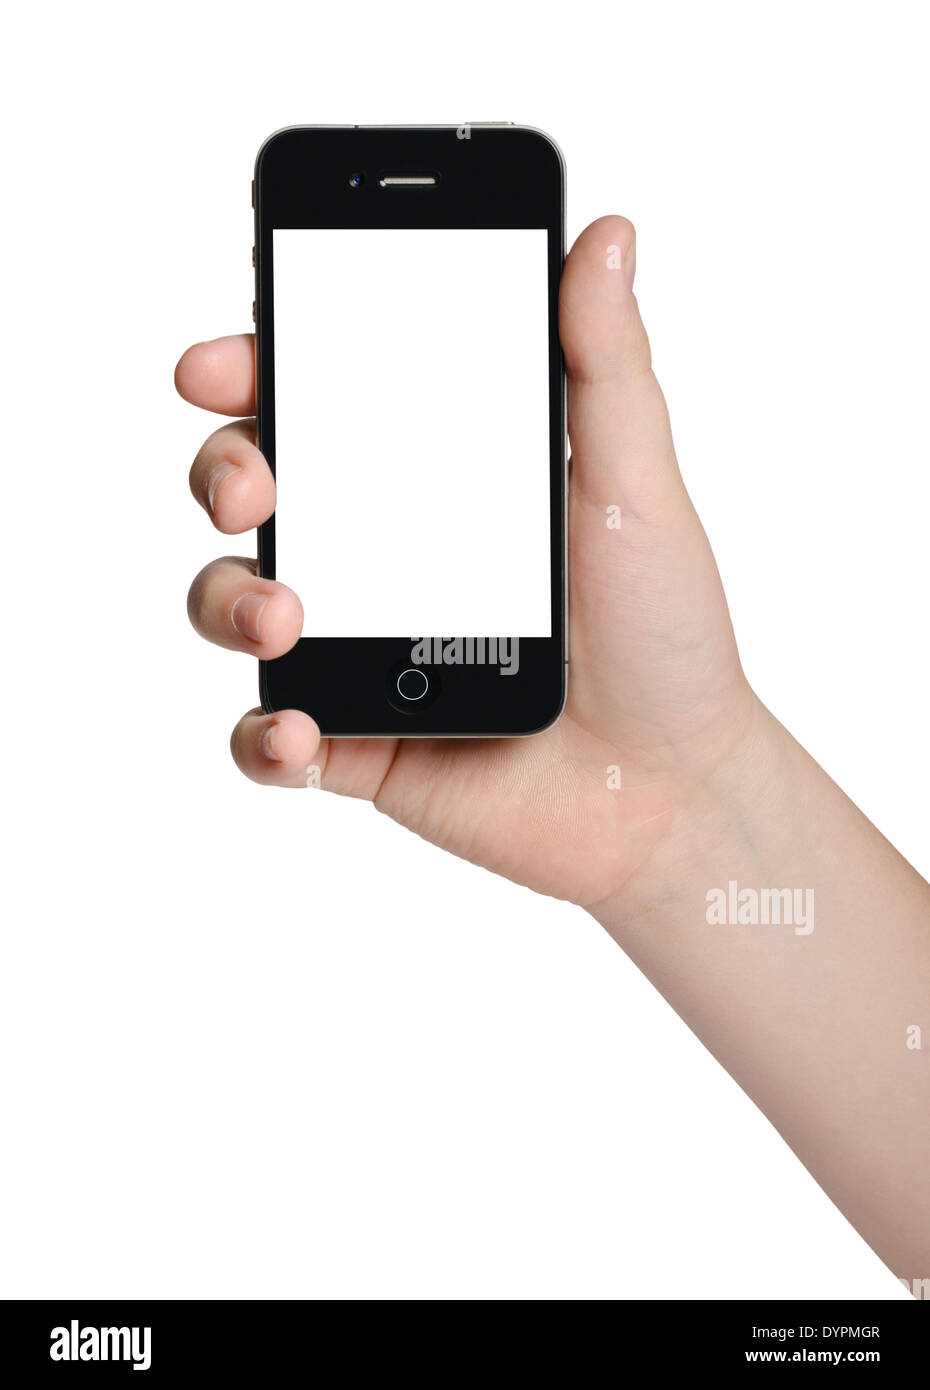 isolated male hand holding a black phone similar to iphone tablet touch computer gadget with isolated display Stock Photo